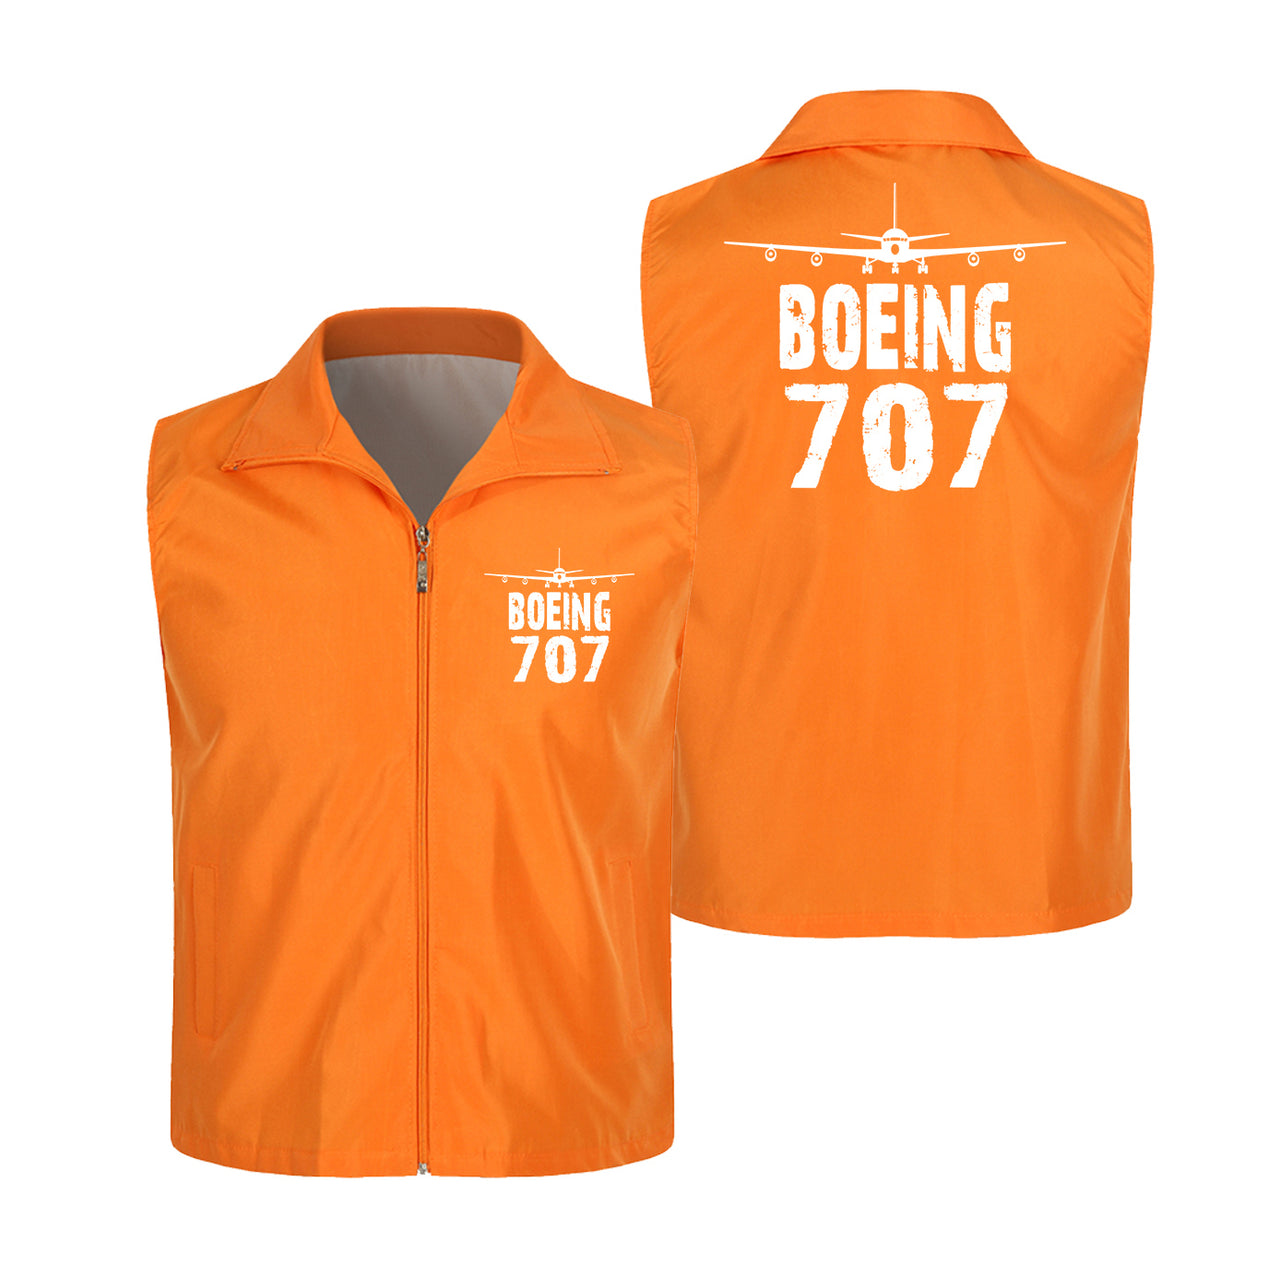 Boeing 707 & Plane Designed Thin Style Vests